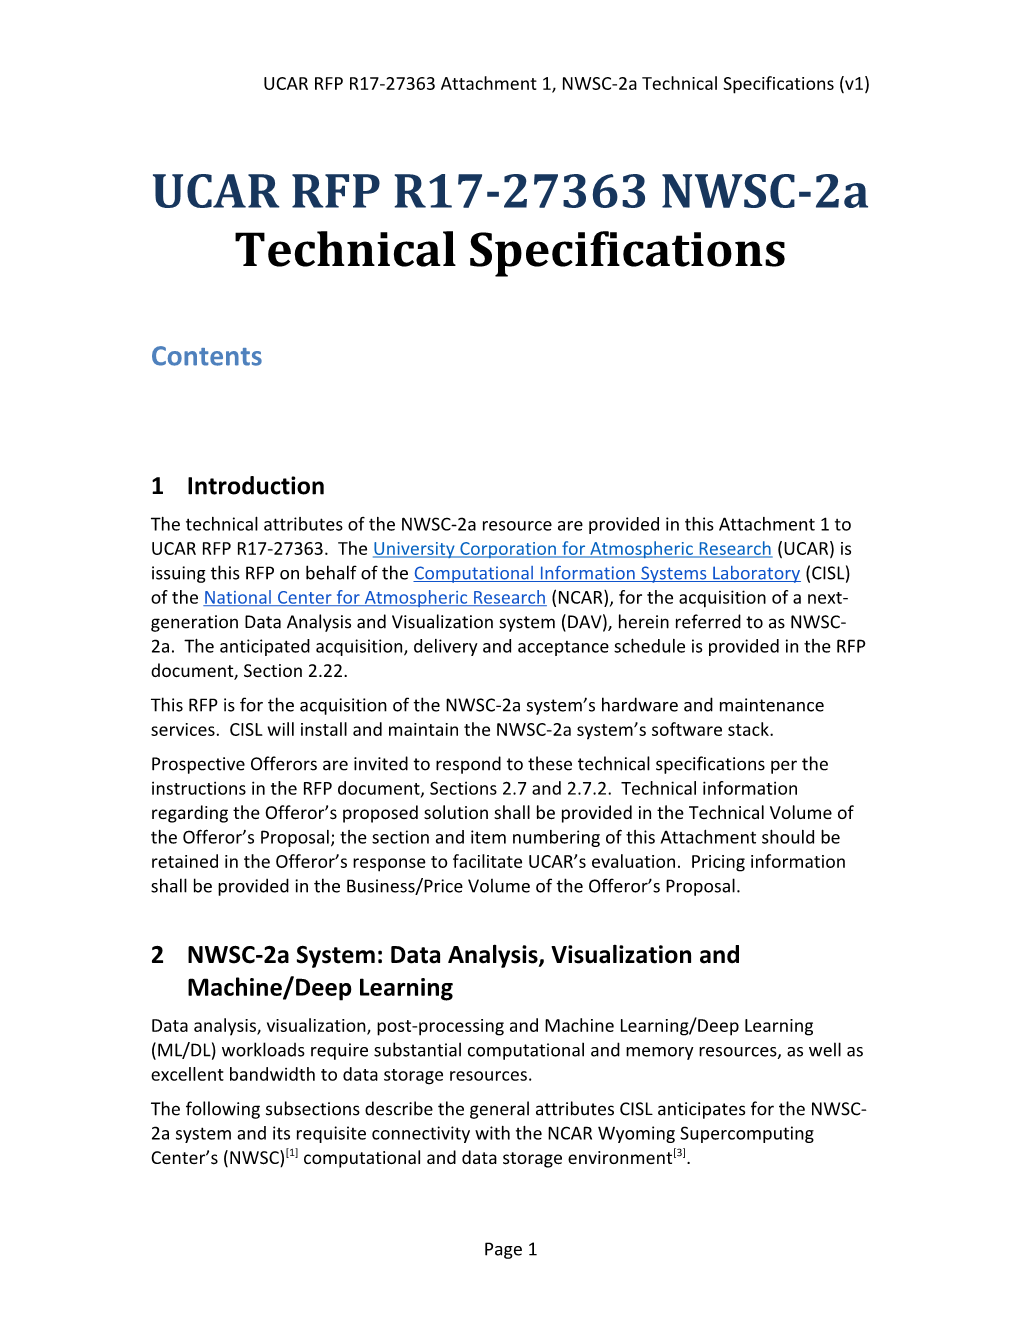 UCAR RFP R17-27363 Attachment 1, NWSC-2A Technical Specifications (V1)